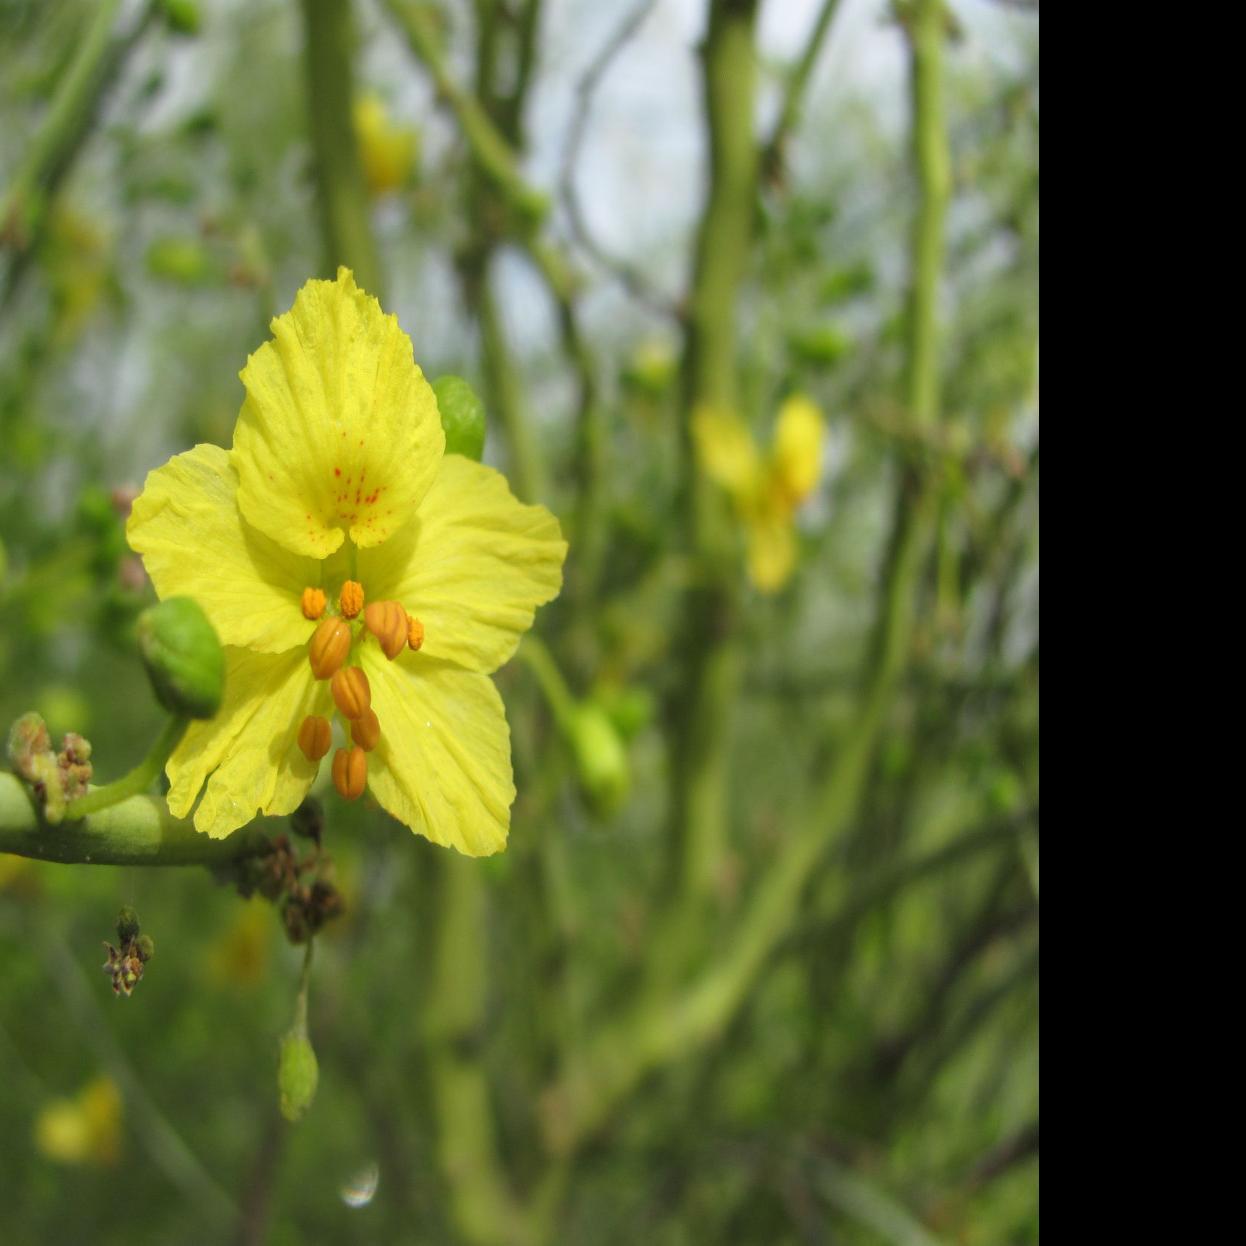 Palo Verde Blooms Beautiful But Bad News For Some With Allergies